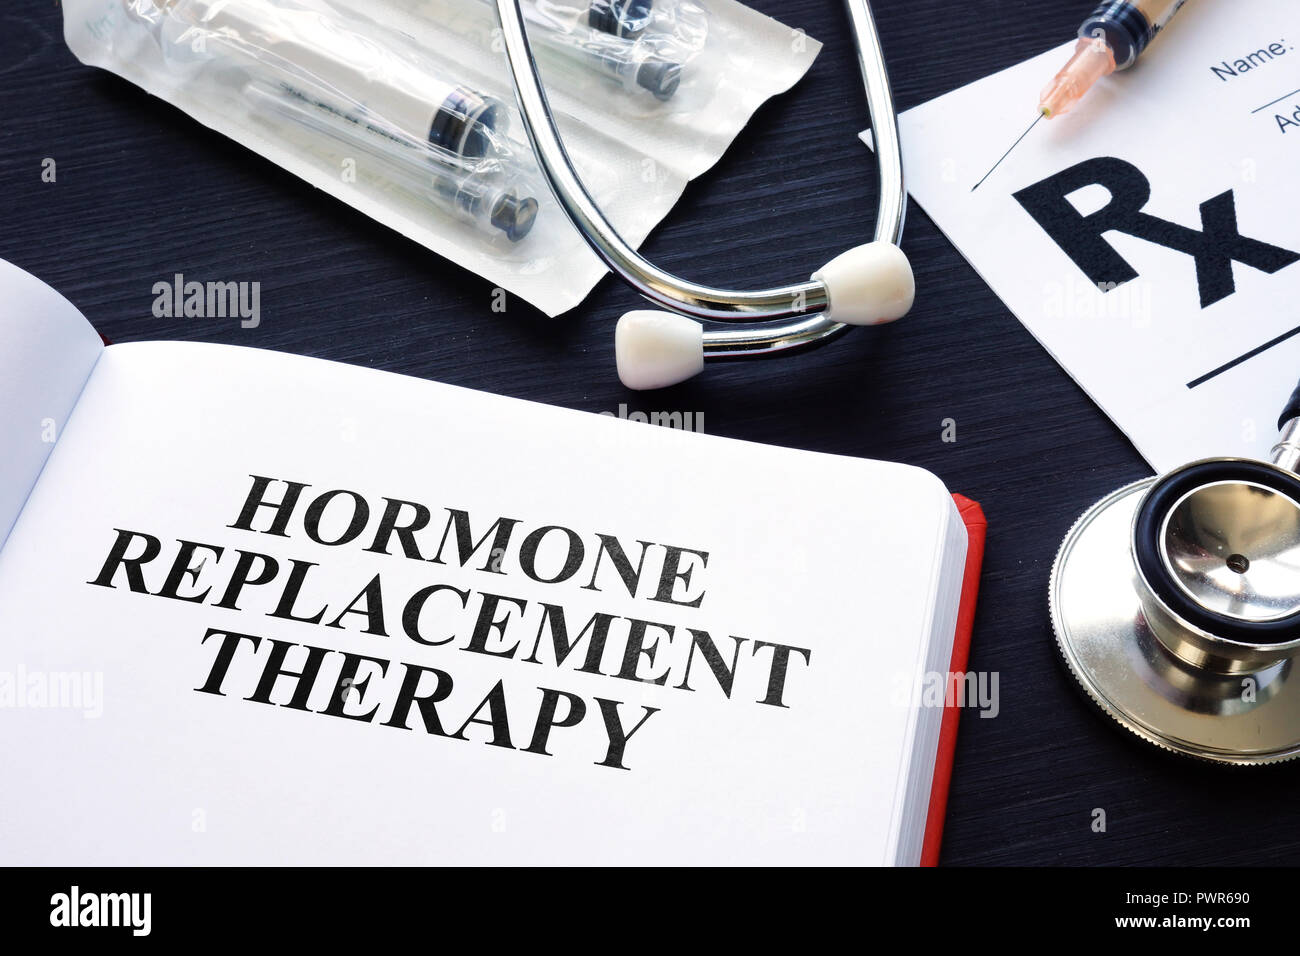 Book about Hormone Replacement Therapy and syringes. Stock Photo